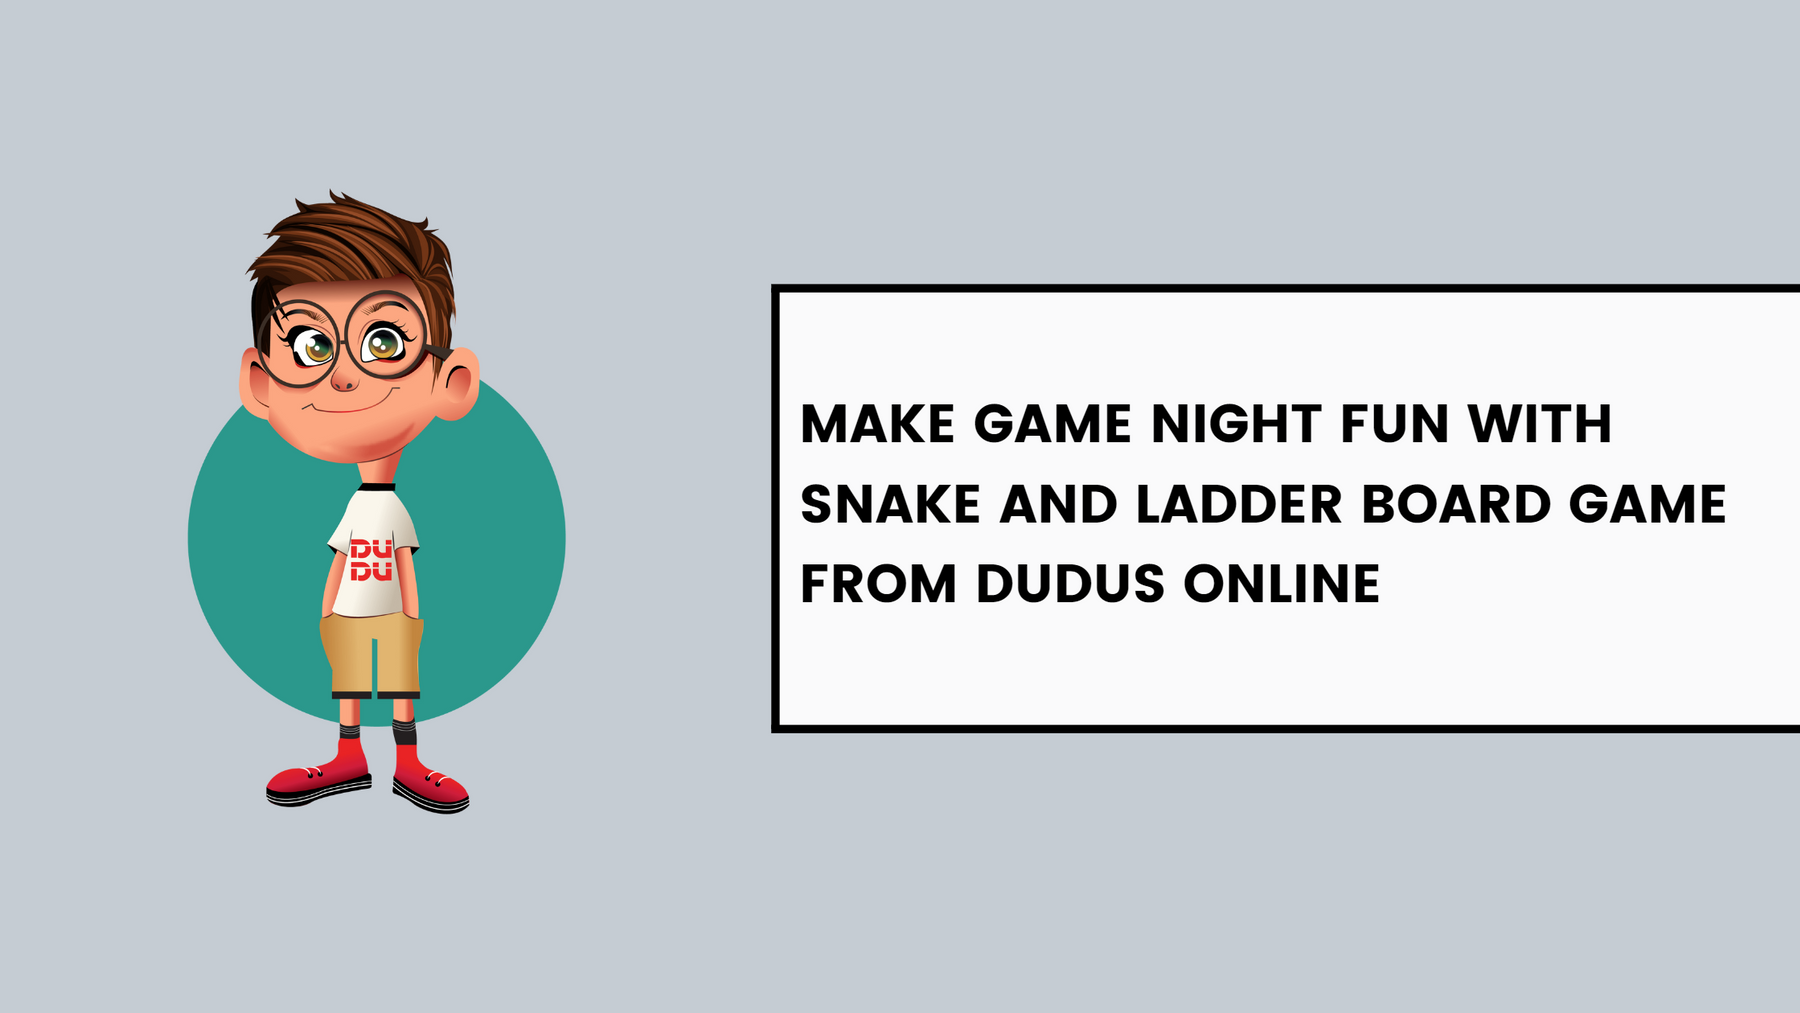 Make Game Night Fun With Snake And Ladder Board Game From Dudus Online